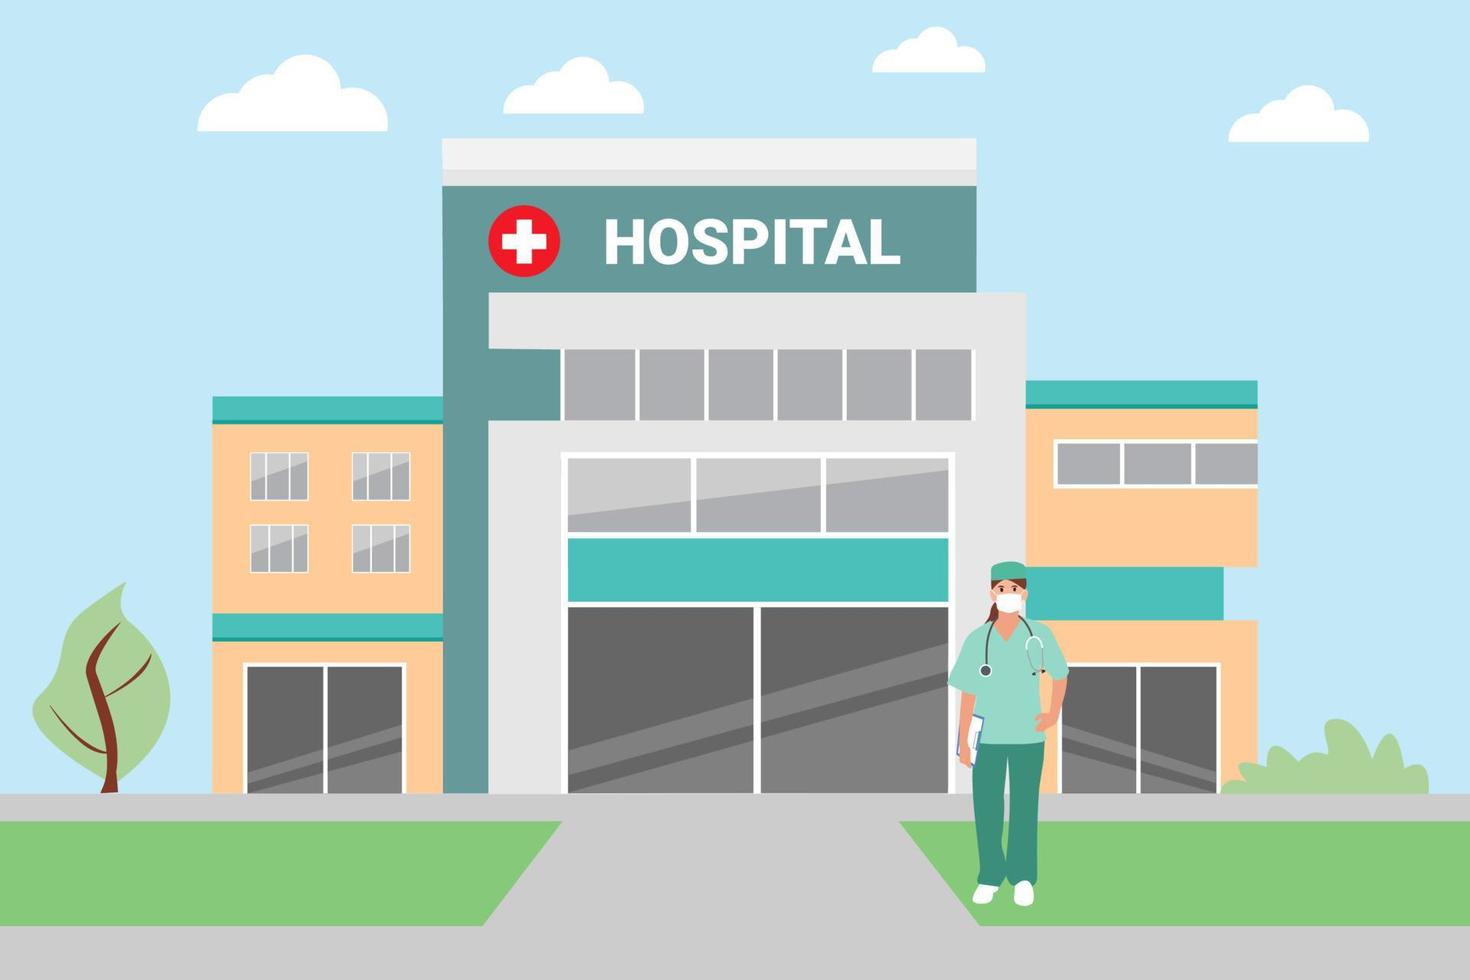 The hospital building is professional medical center. Modern Hospital hospital  Outdoor.Professional doctor on Clinic Backdrop. Vector Flat Cartoon Illustration